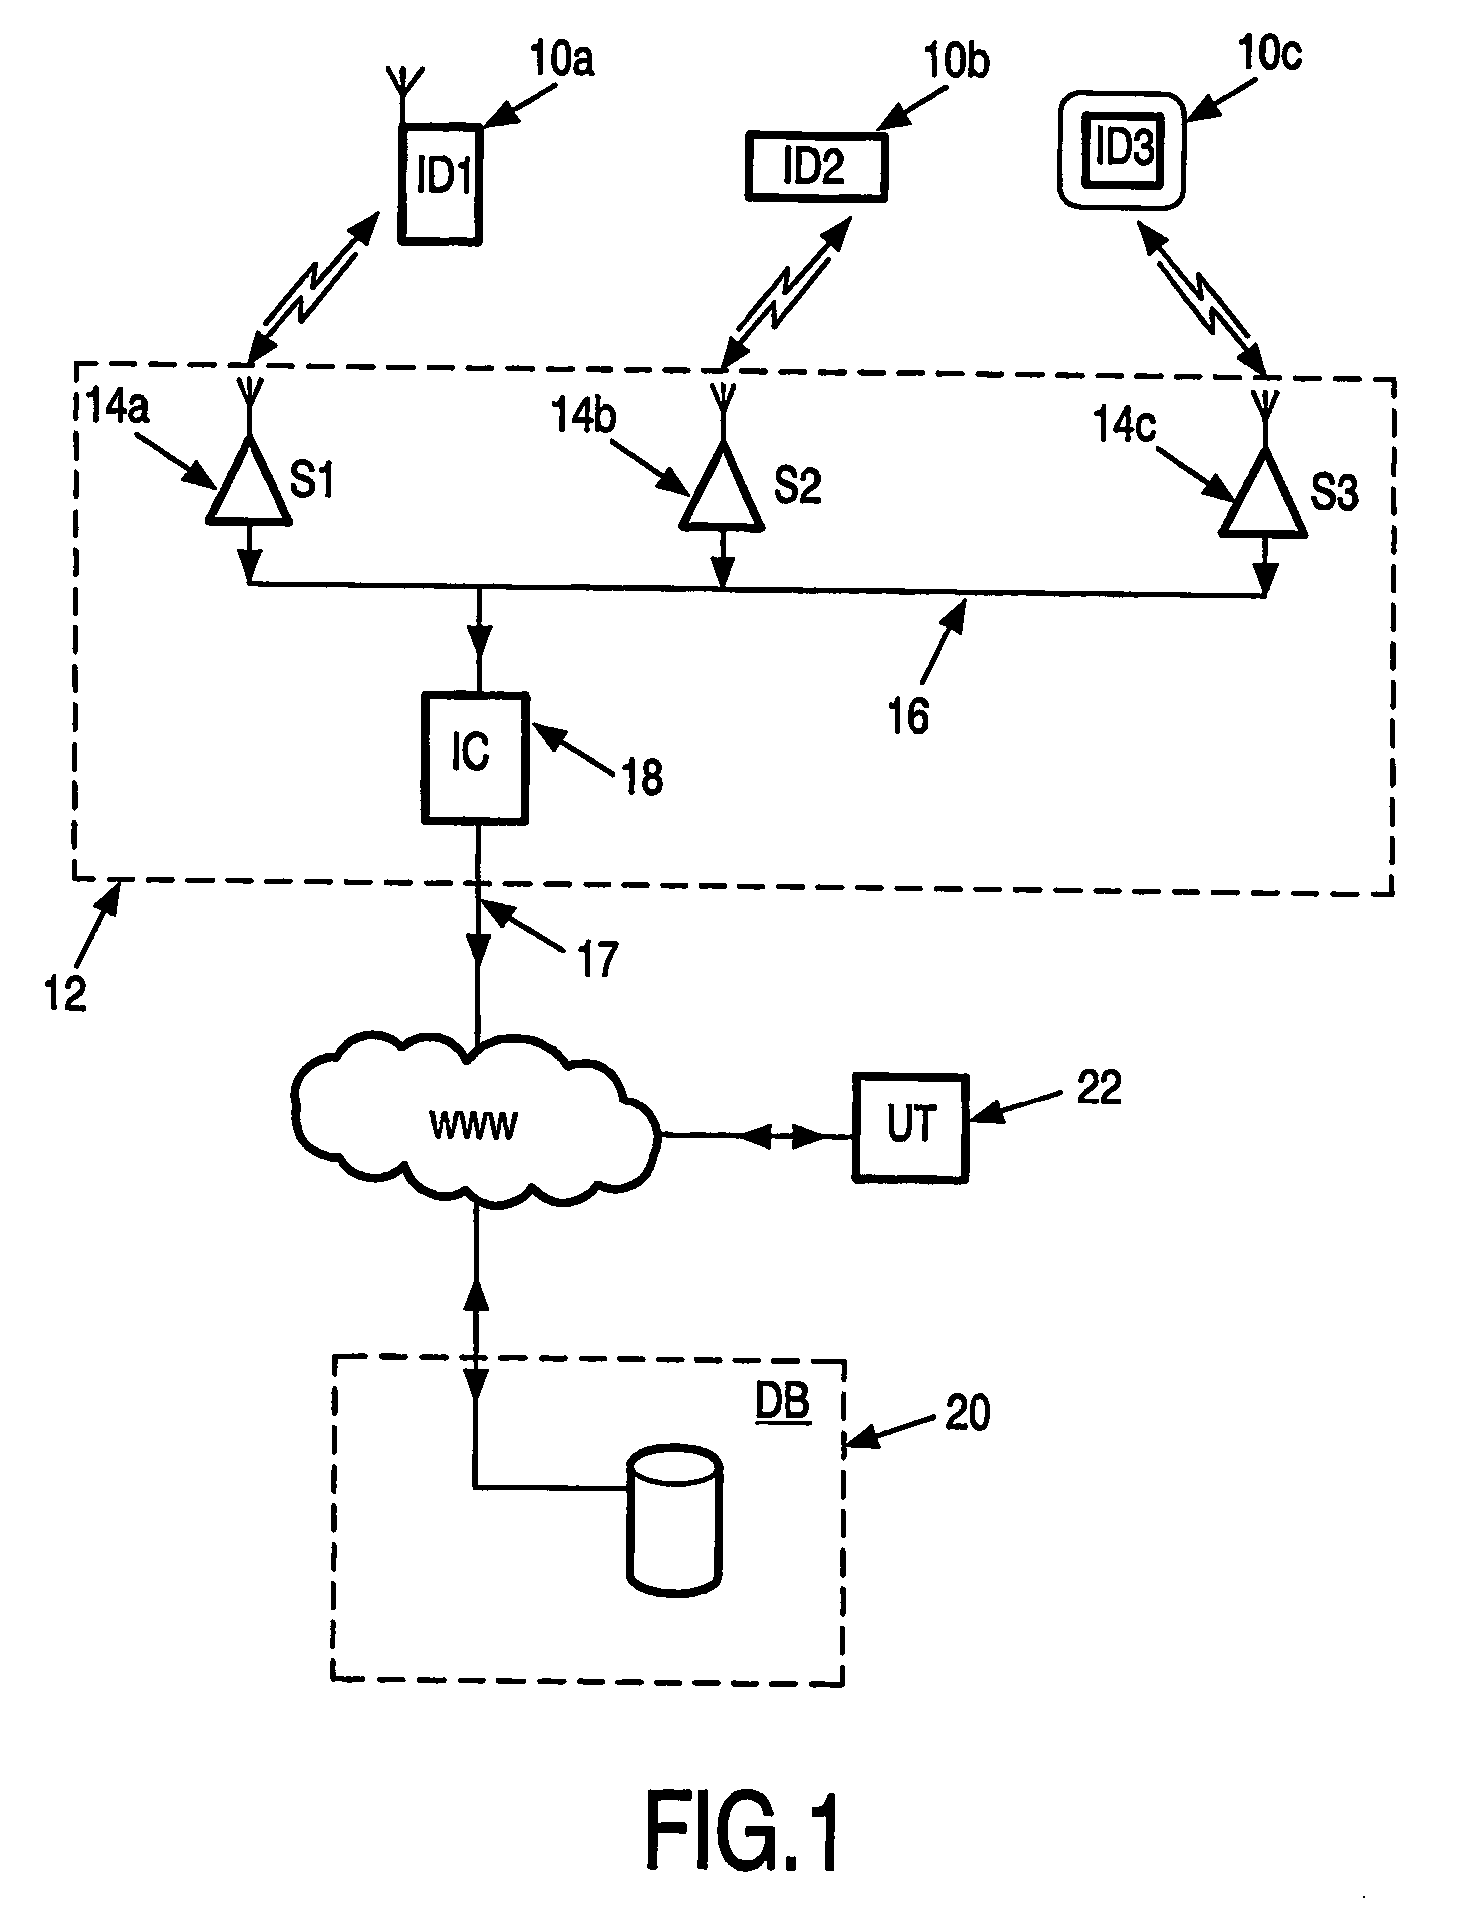 Location tracking of portable devices in a wireless network